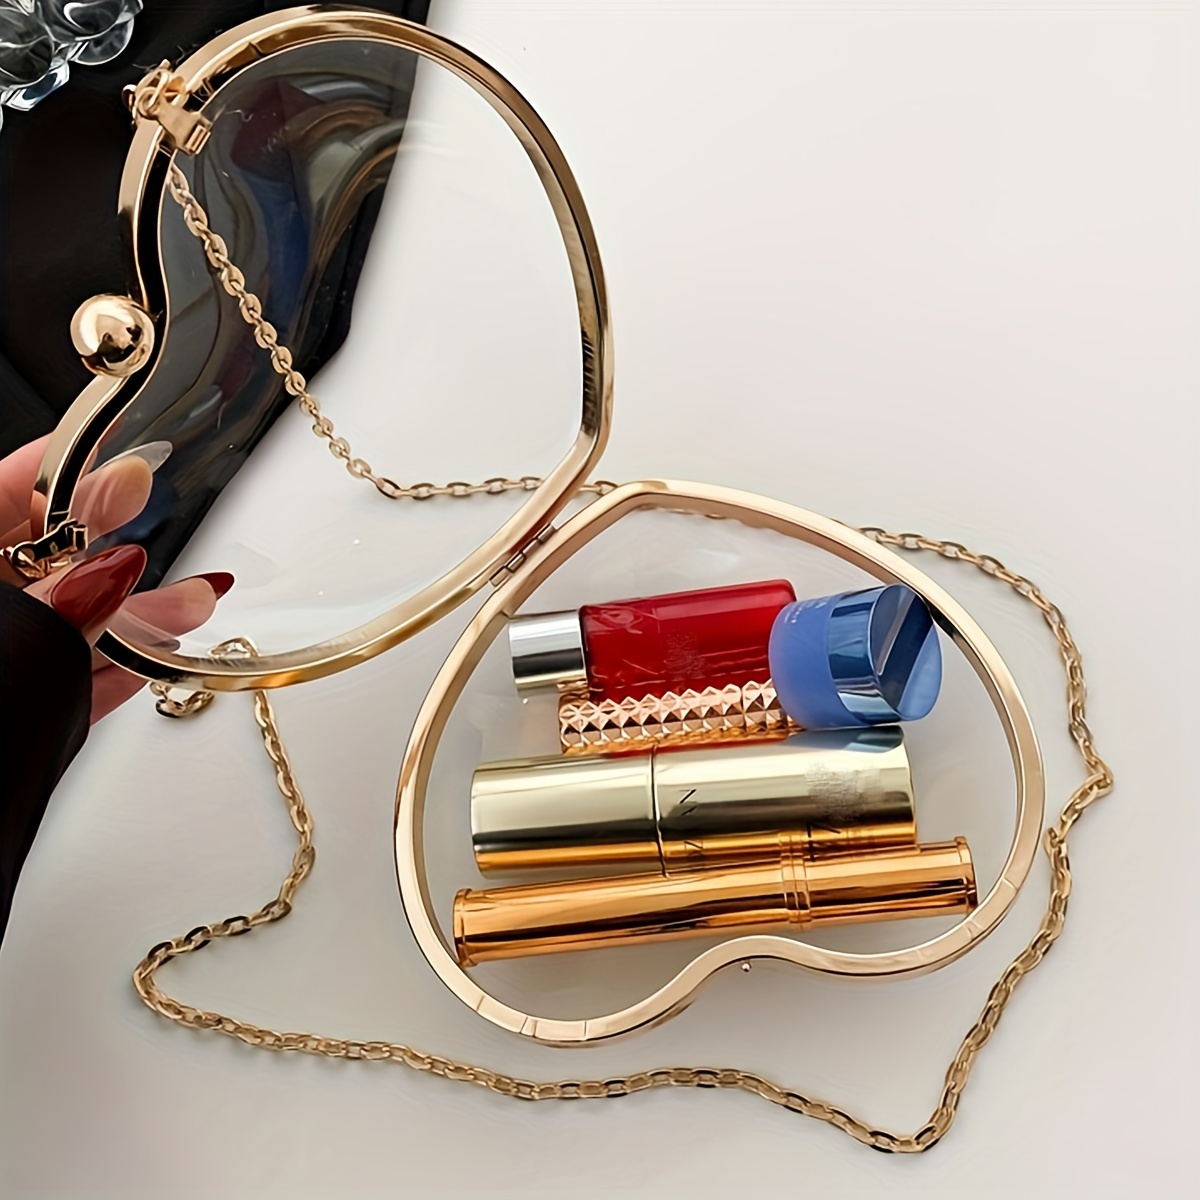 trendy transparent heart shape mini crossbody bag lipstick bag chain shoulder bag suitable for party dating best valentines day gift for girlfriend details 1